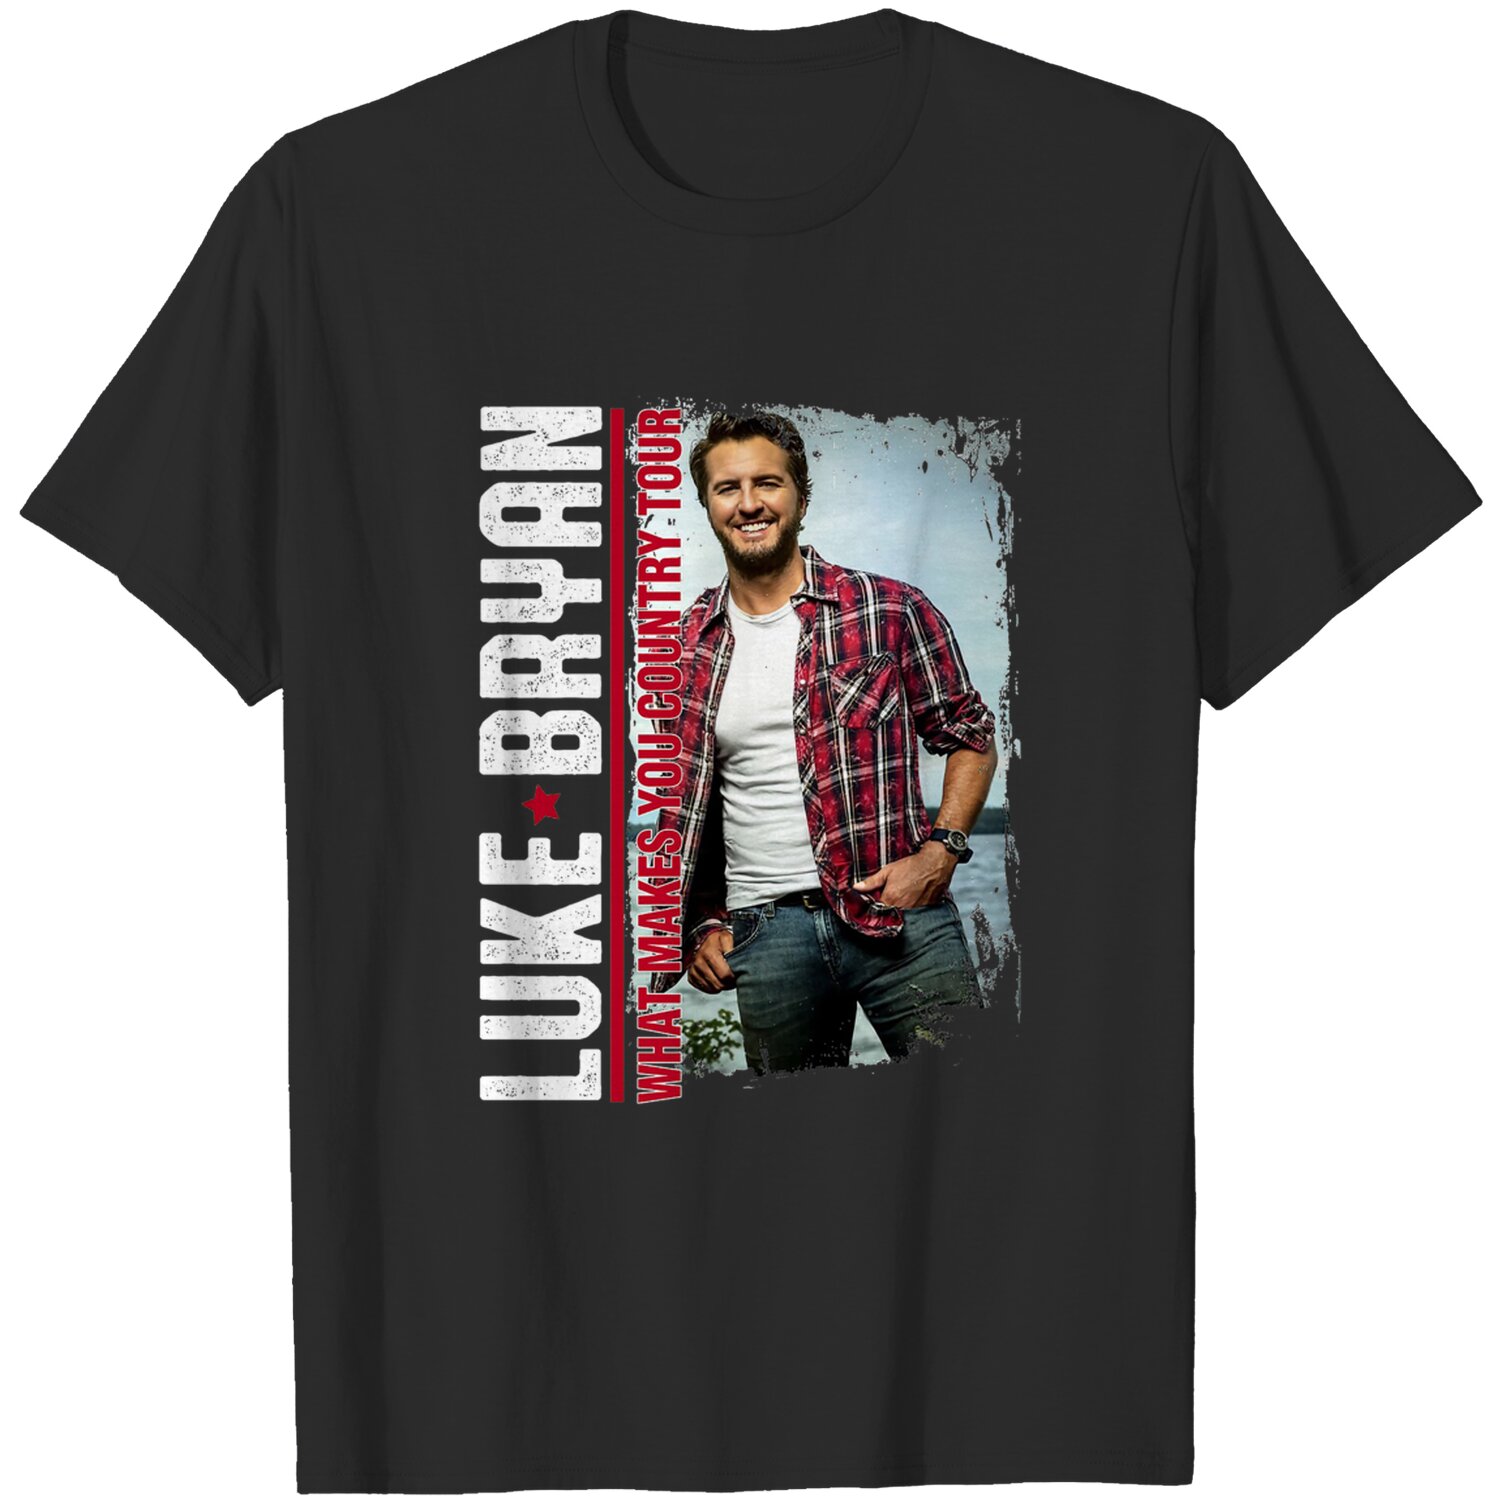 Luke Bryan What Makes You Country Tour Graphic Tee DZT